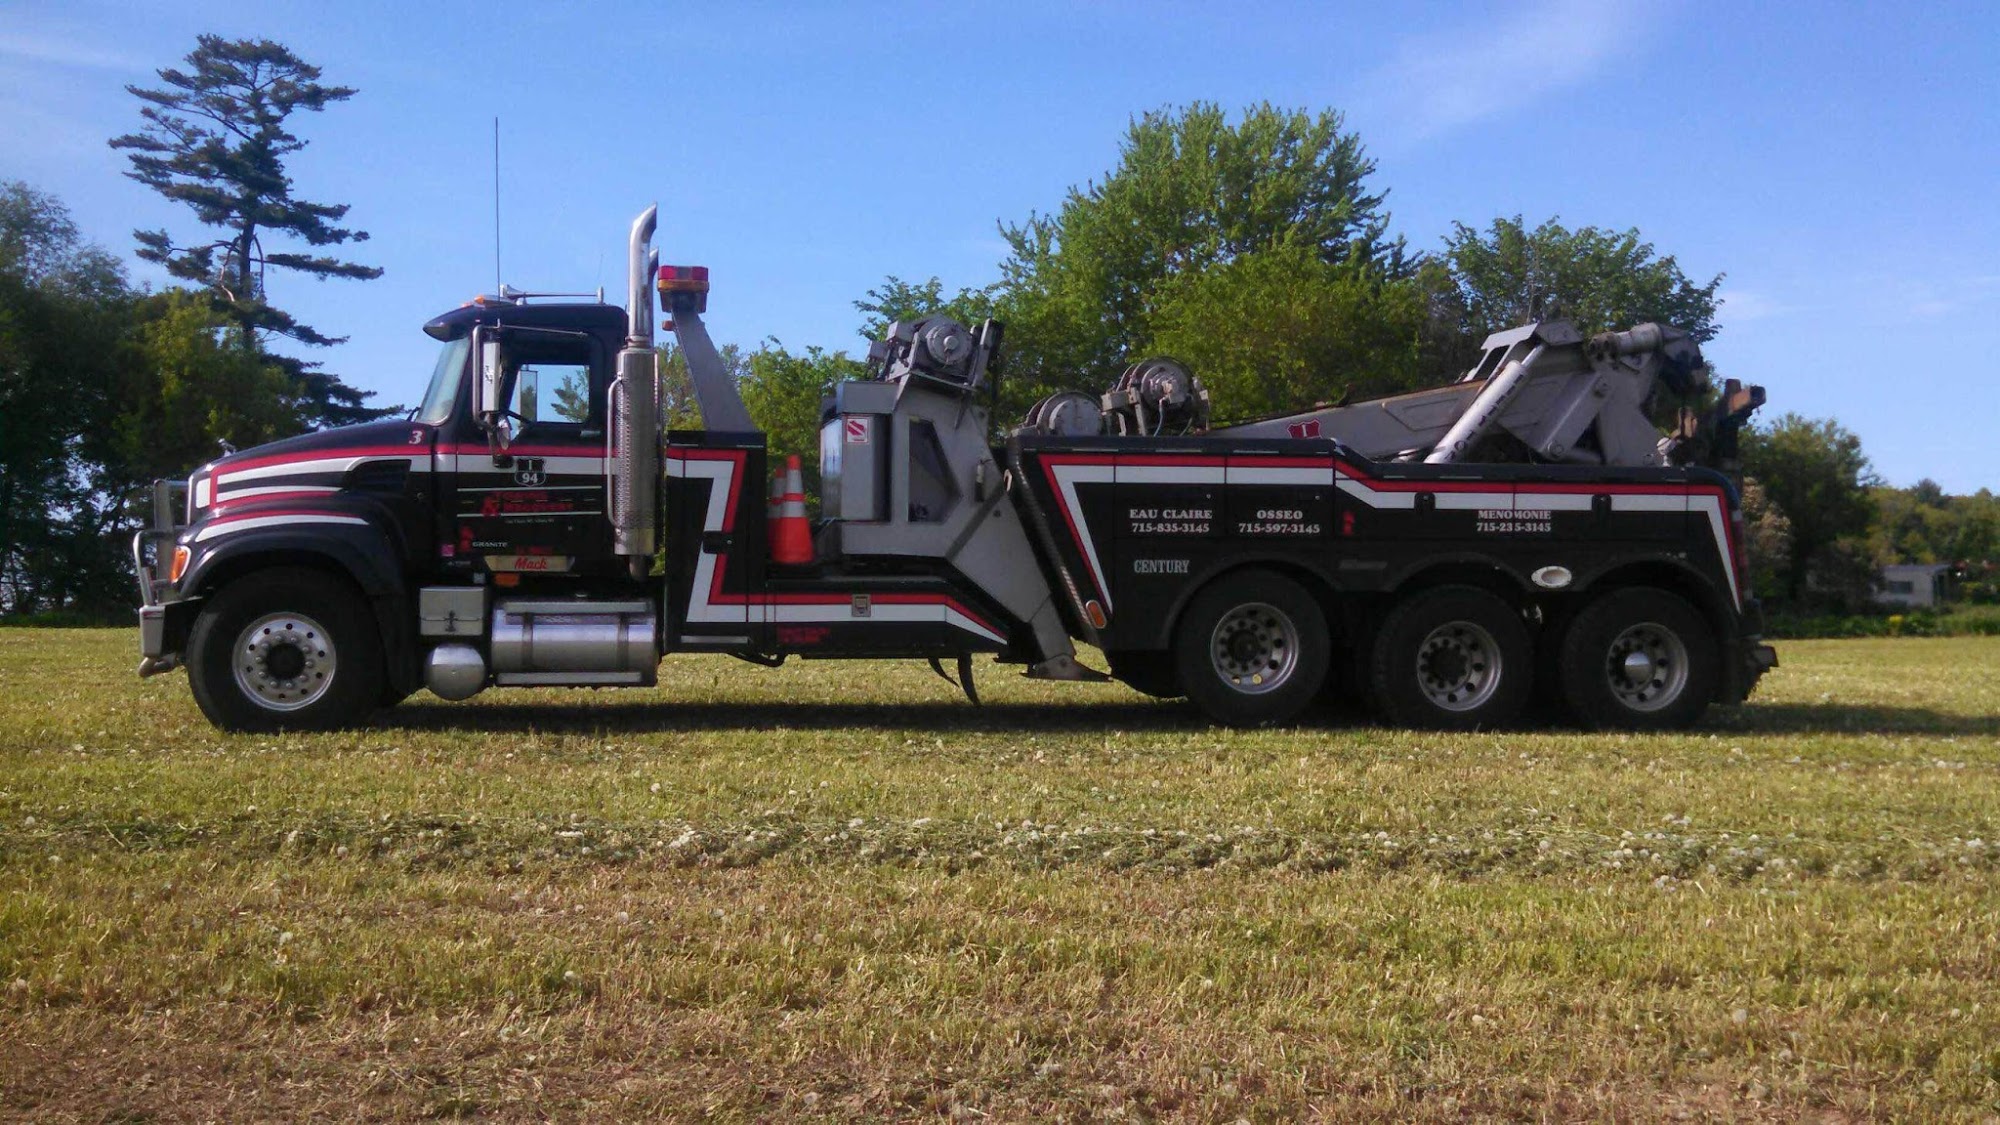 I-94 Towing & Recovery